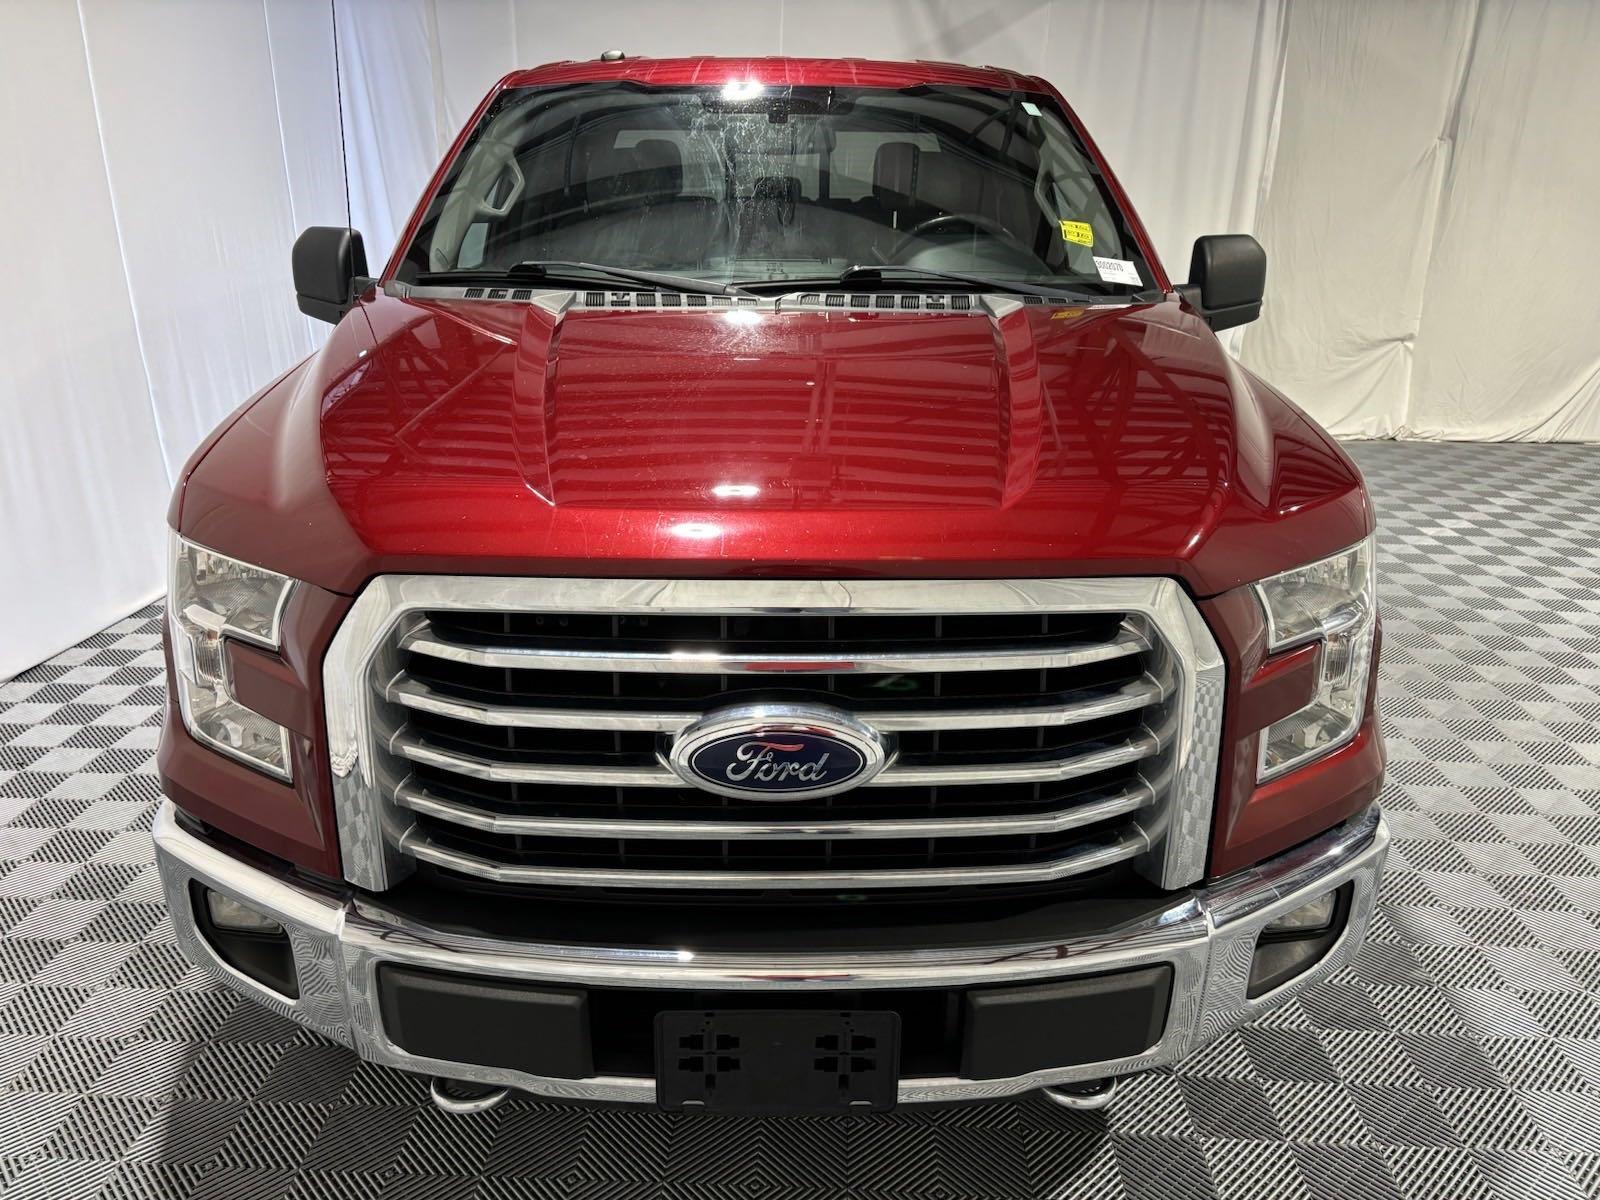 Used 2016 Ford F-150 XLT SuperCrew Cab Styleside for sale in St Joseph MO